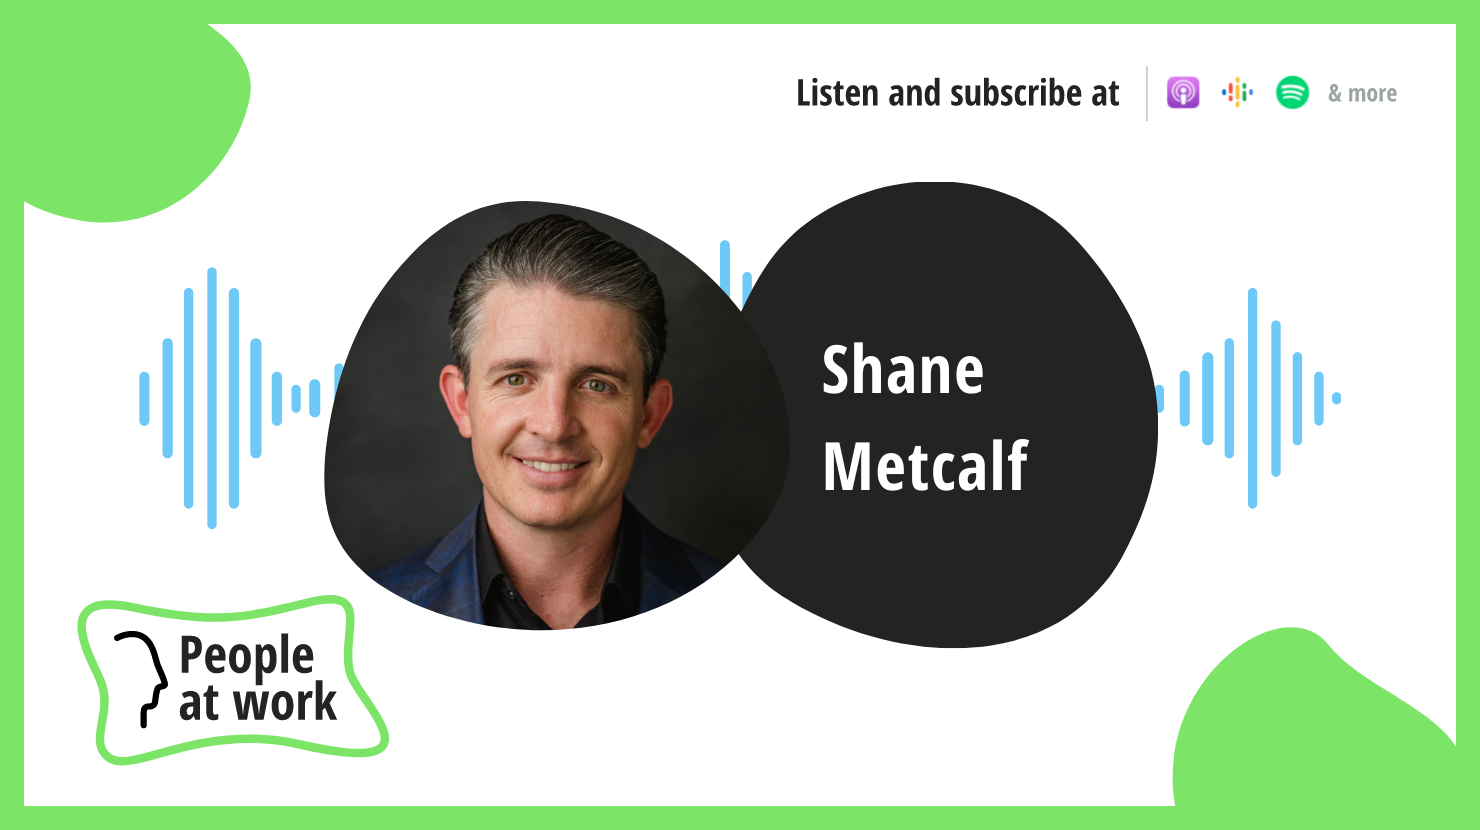 Building a transformational culture with Shane Metcalf